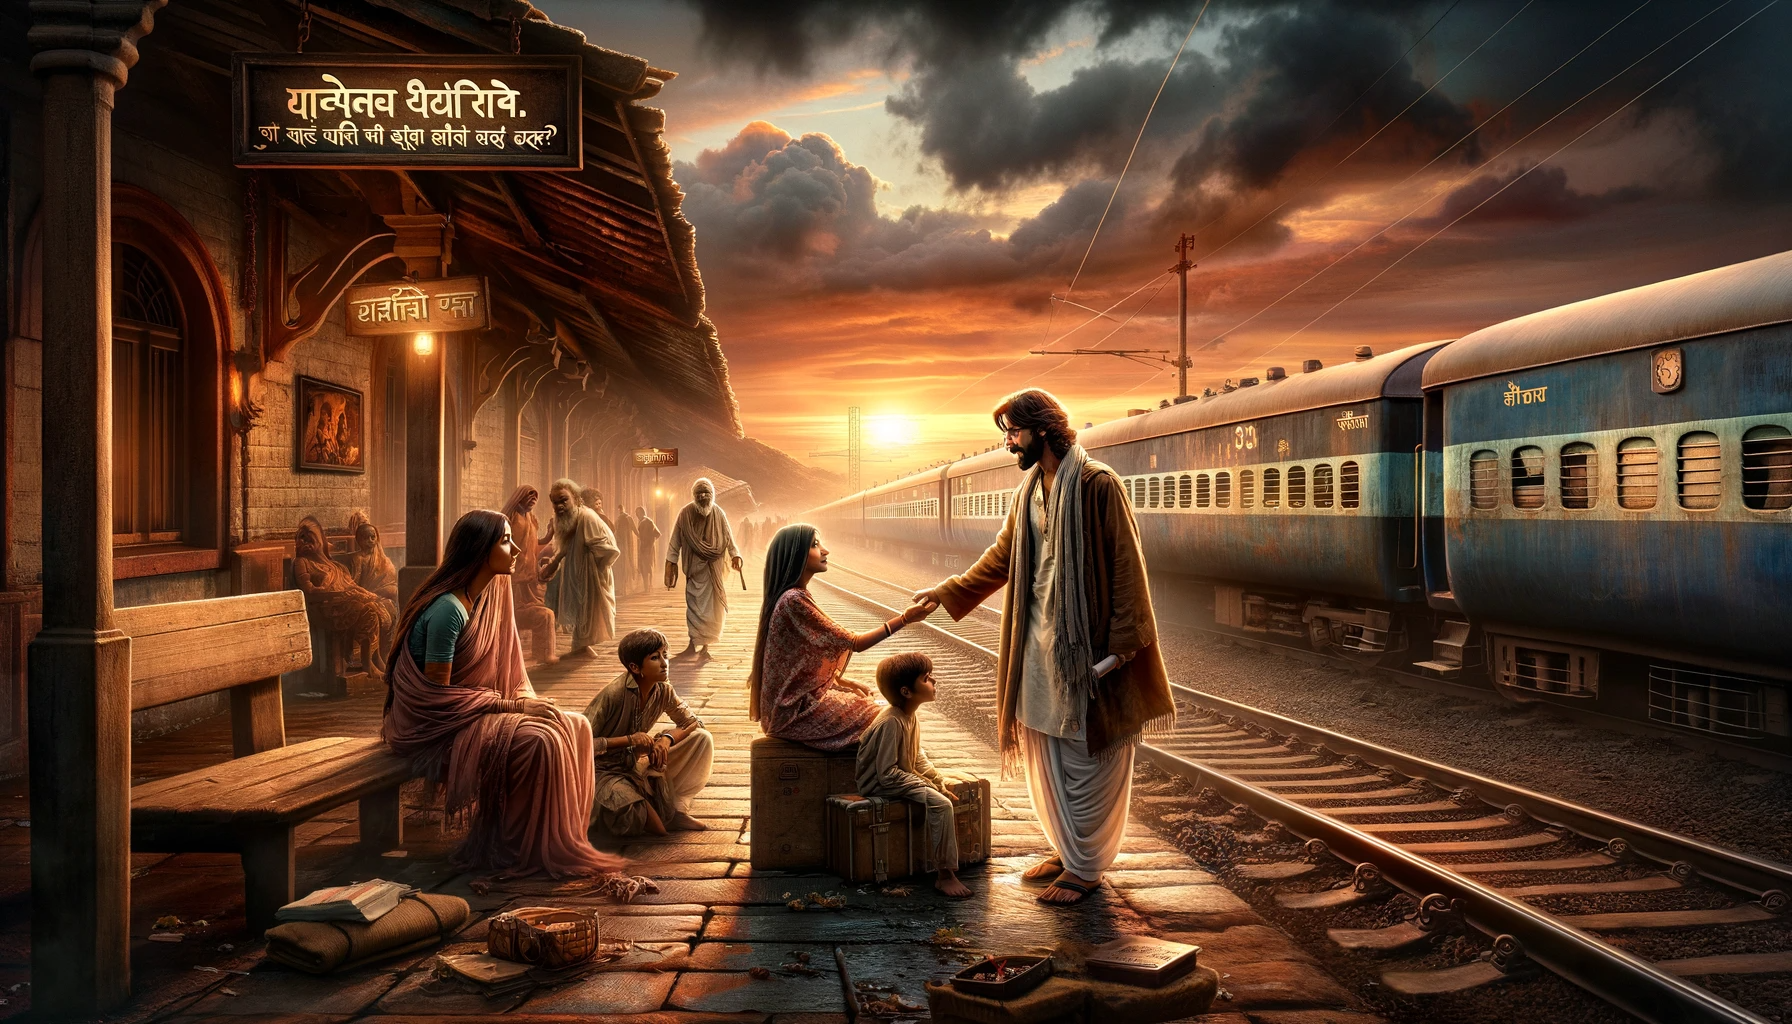 In the Vision of a Pure Heart: A Night of Faith at a Railway Station